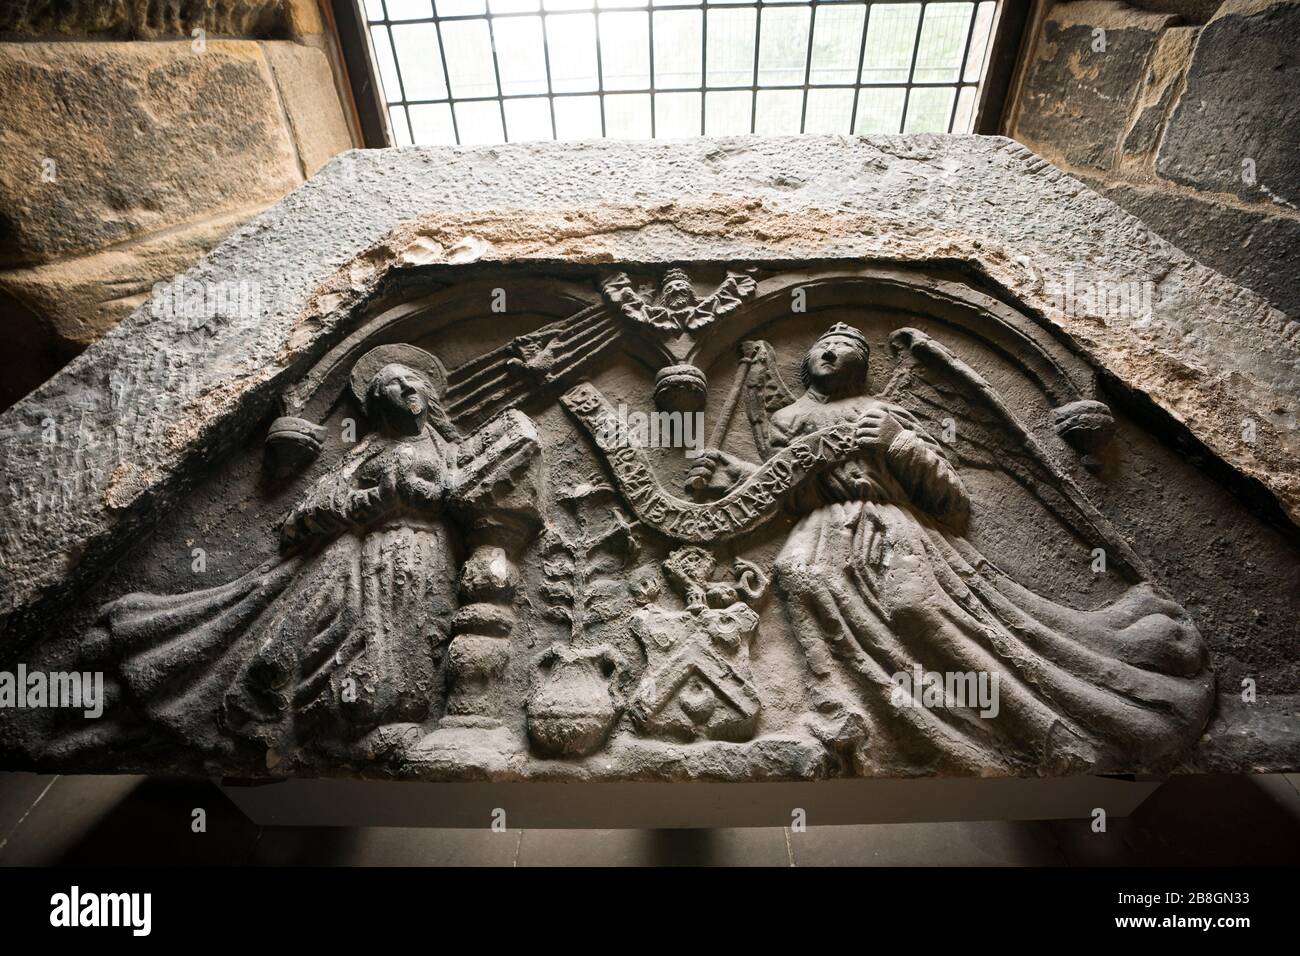 Annunication Stone, a sculpture from 1530 AD that tells the story of the archangel appearing to Virgin Mary, that once sat in the Royal Palace. Stock Photo